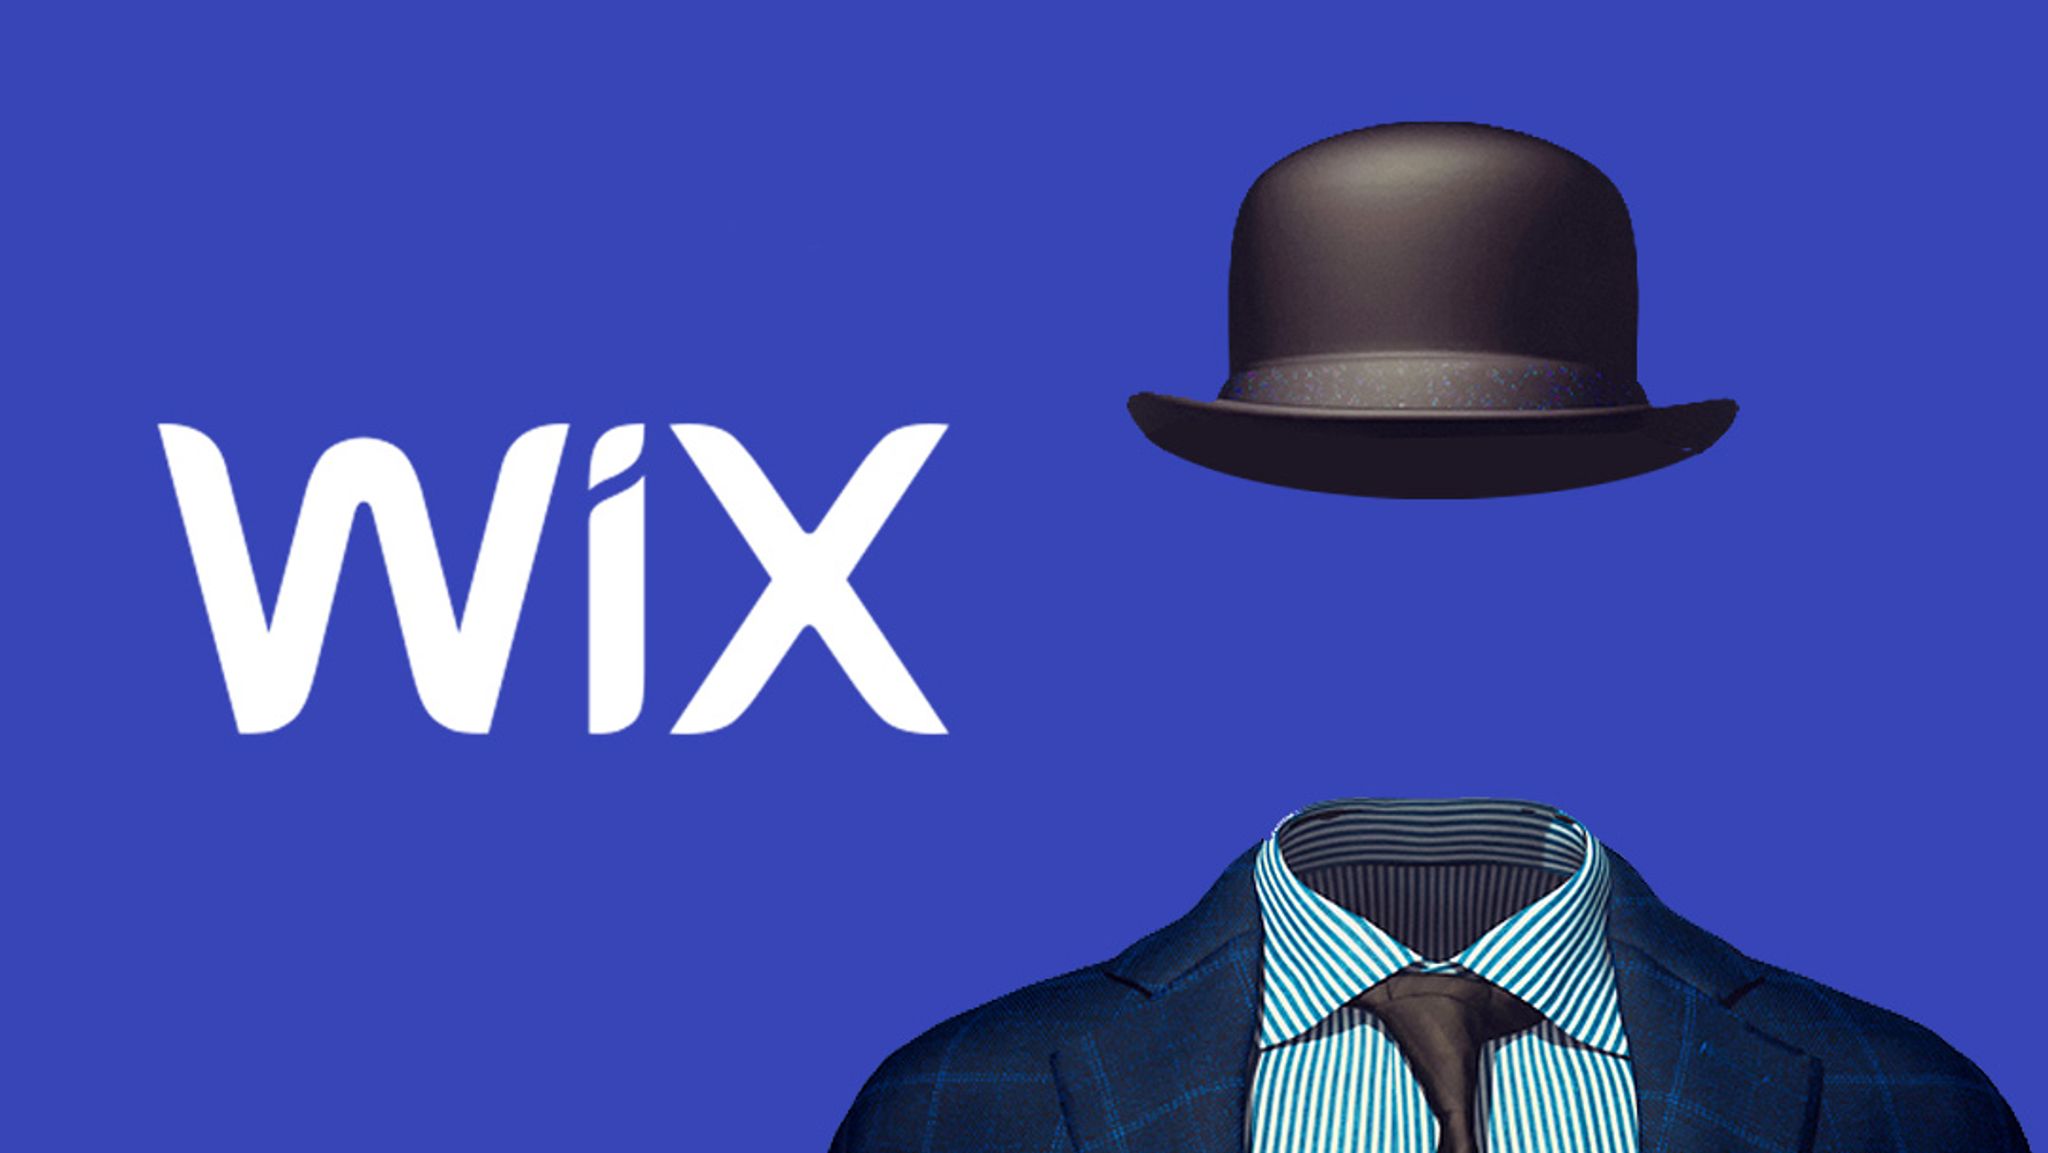 Wix logo with image of a headless man's torso and floating bowler hat